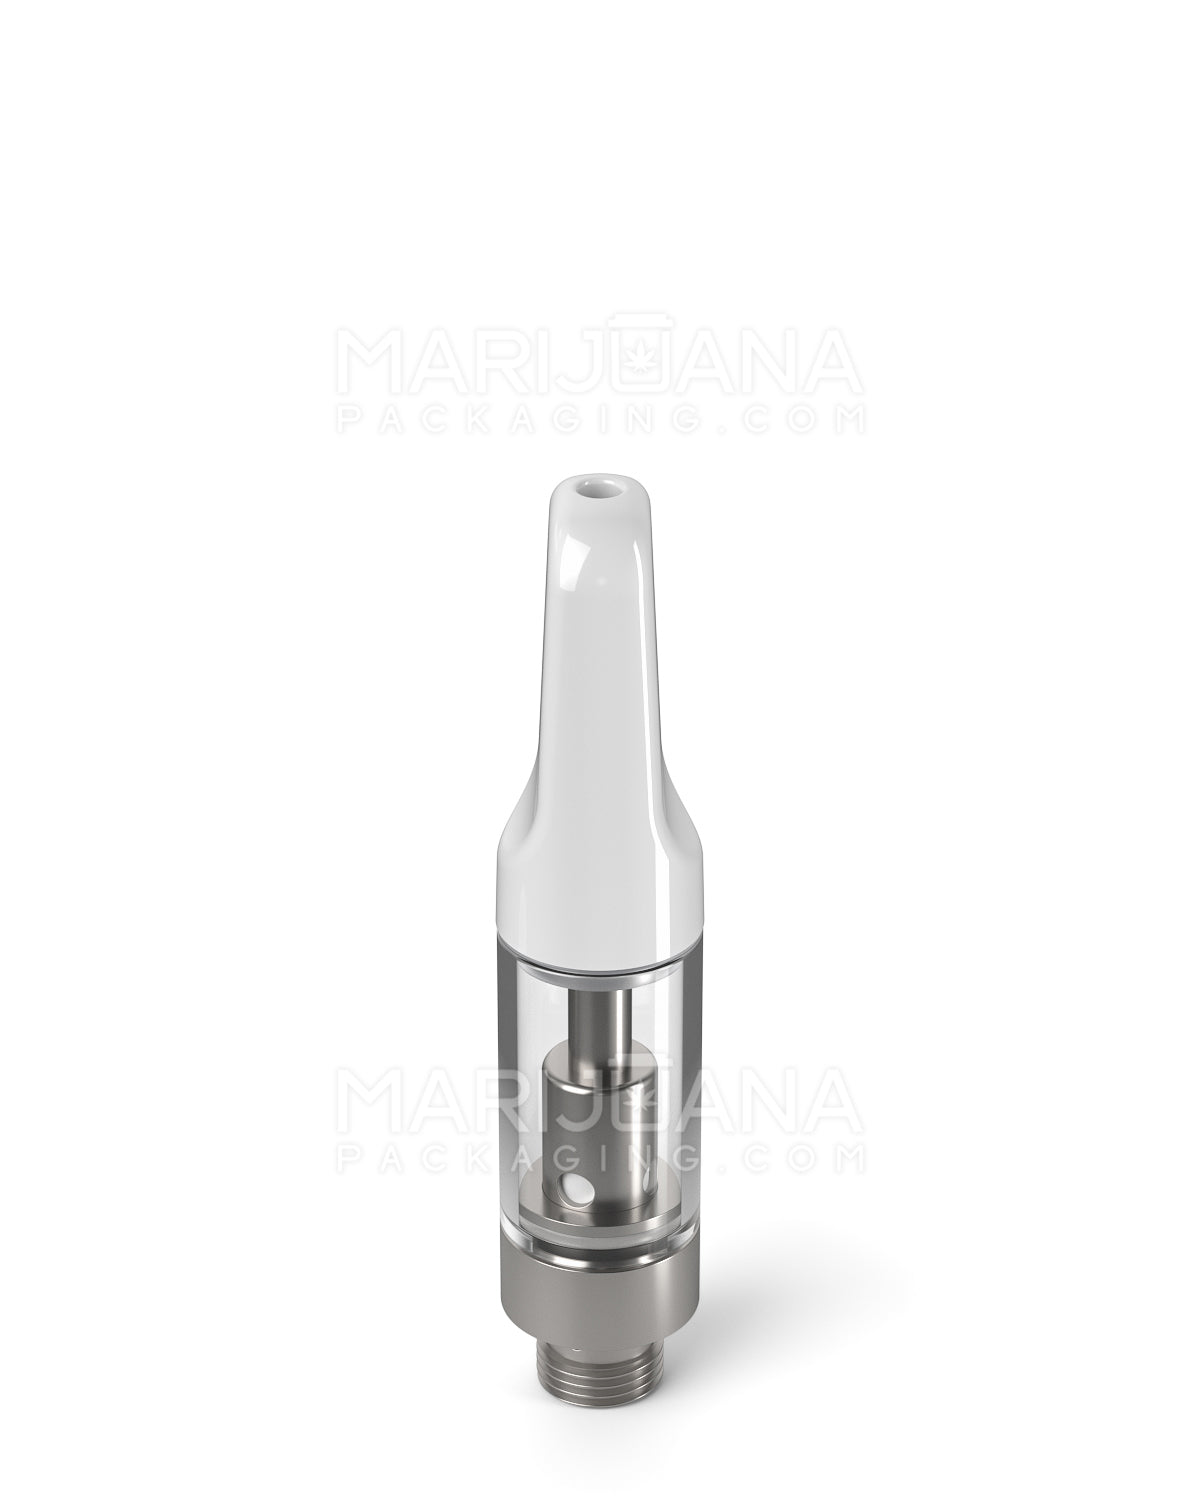 CCELL | Liquid6 Reactor Glass Vape Cartridge with White Ceramic Mouthpiece | 0.5mL - Screw On - 100 Count - 4